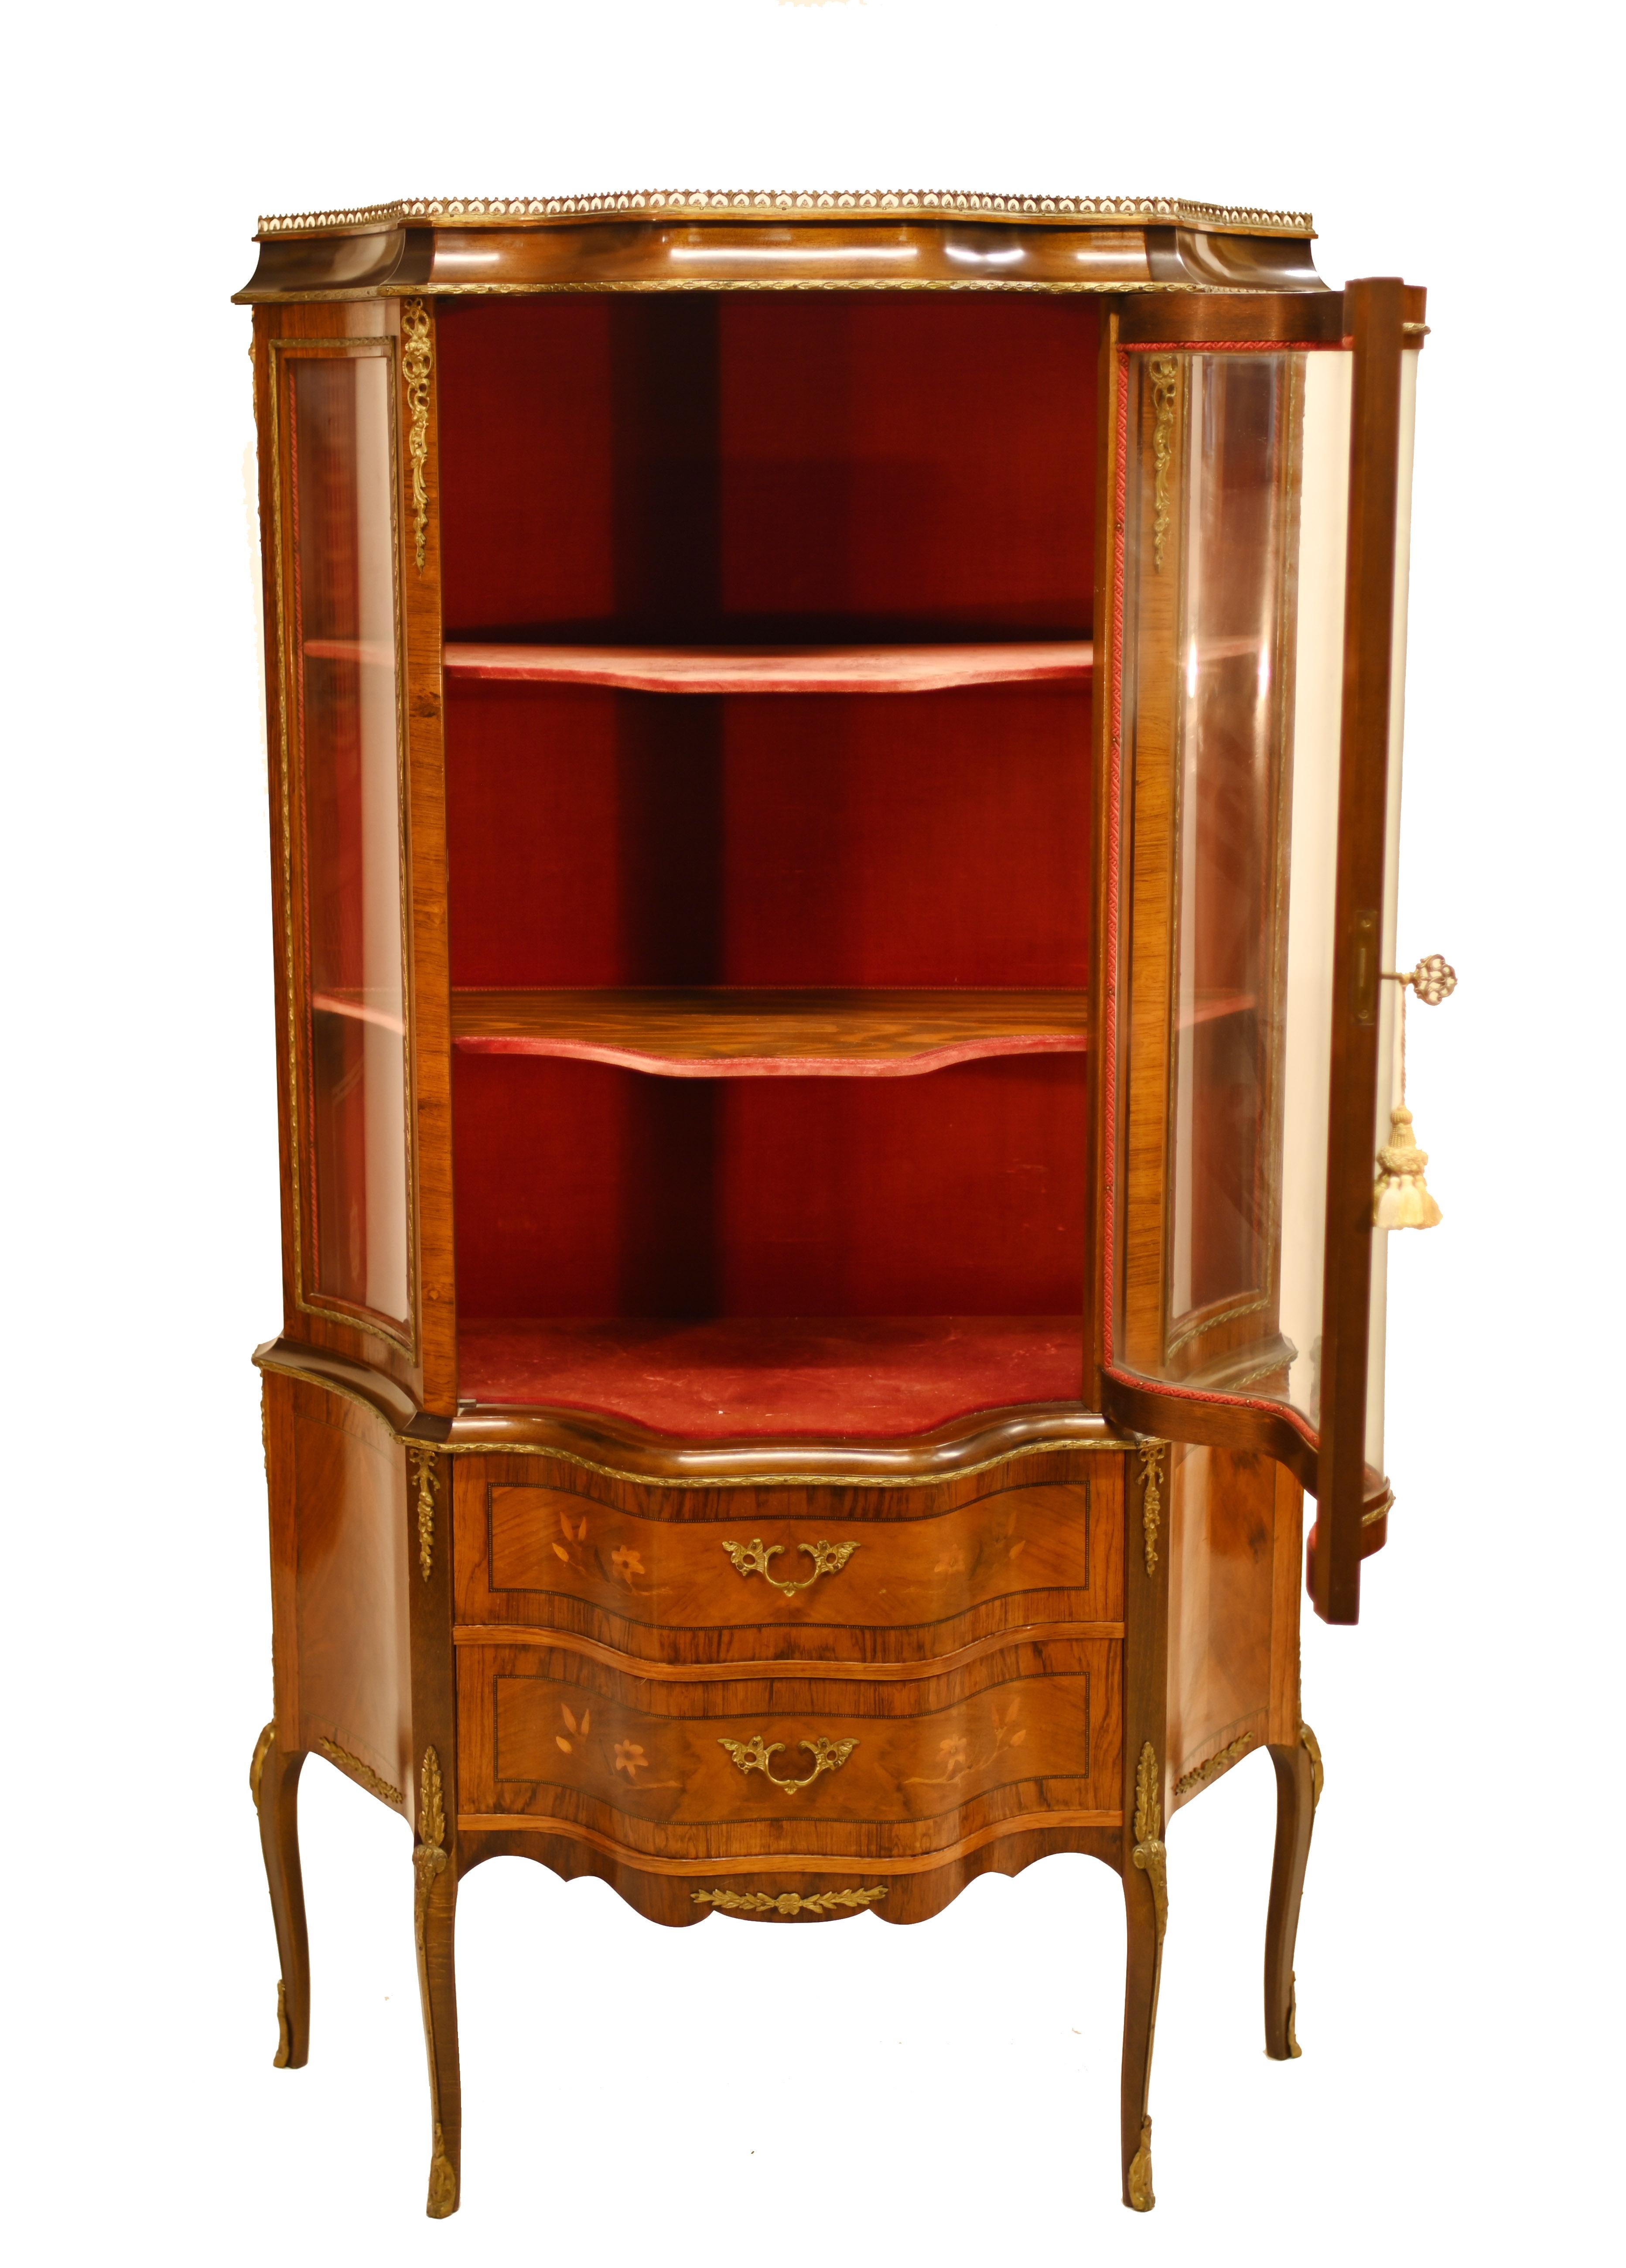 Late 19th Century French Antique Vitrine Shaped China Cabinet 1880 For Sale